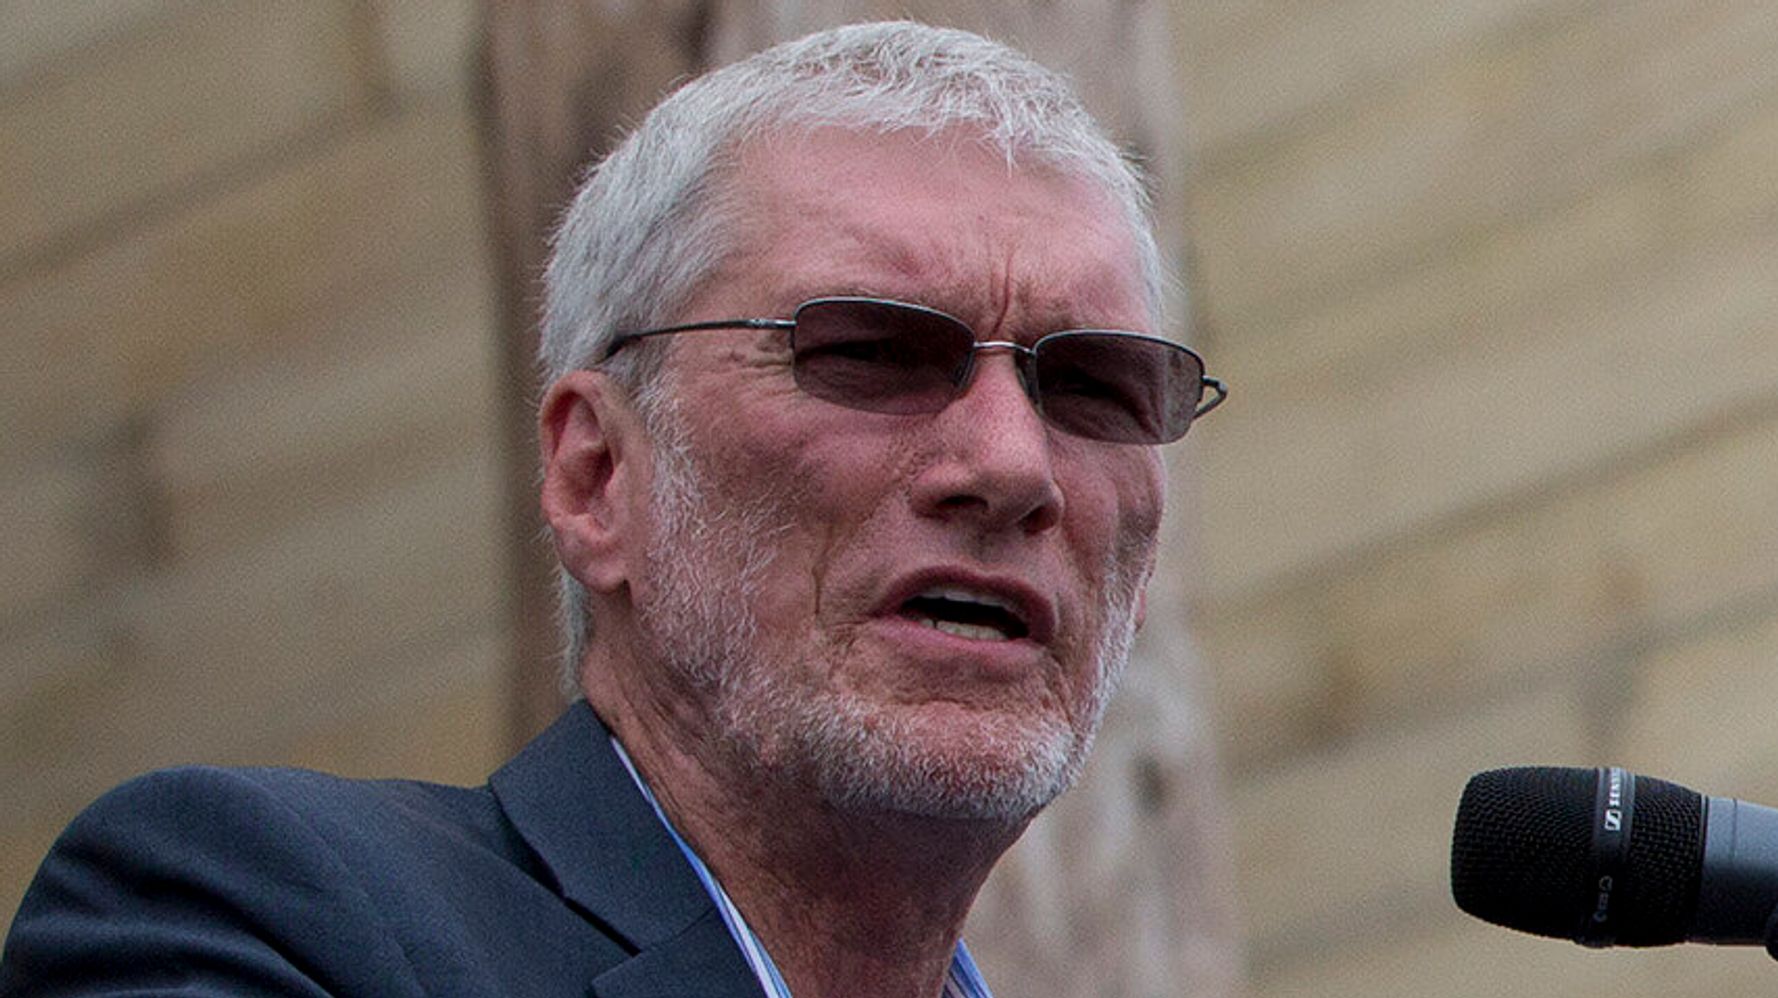 E.T., Phone Hell? Creationist Ken Ham Says Jesus Can't Save Space Aliens